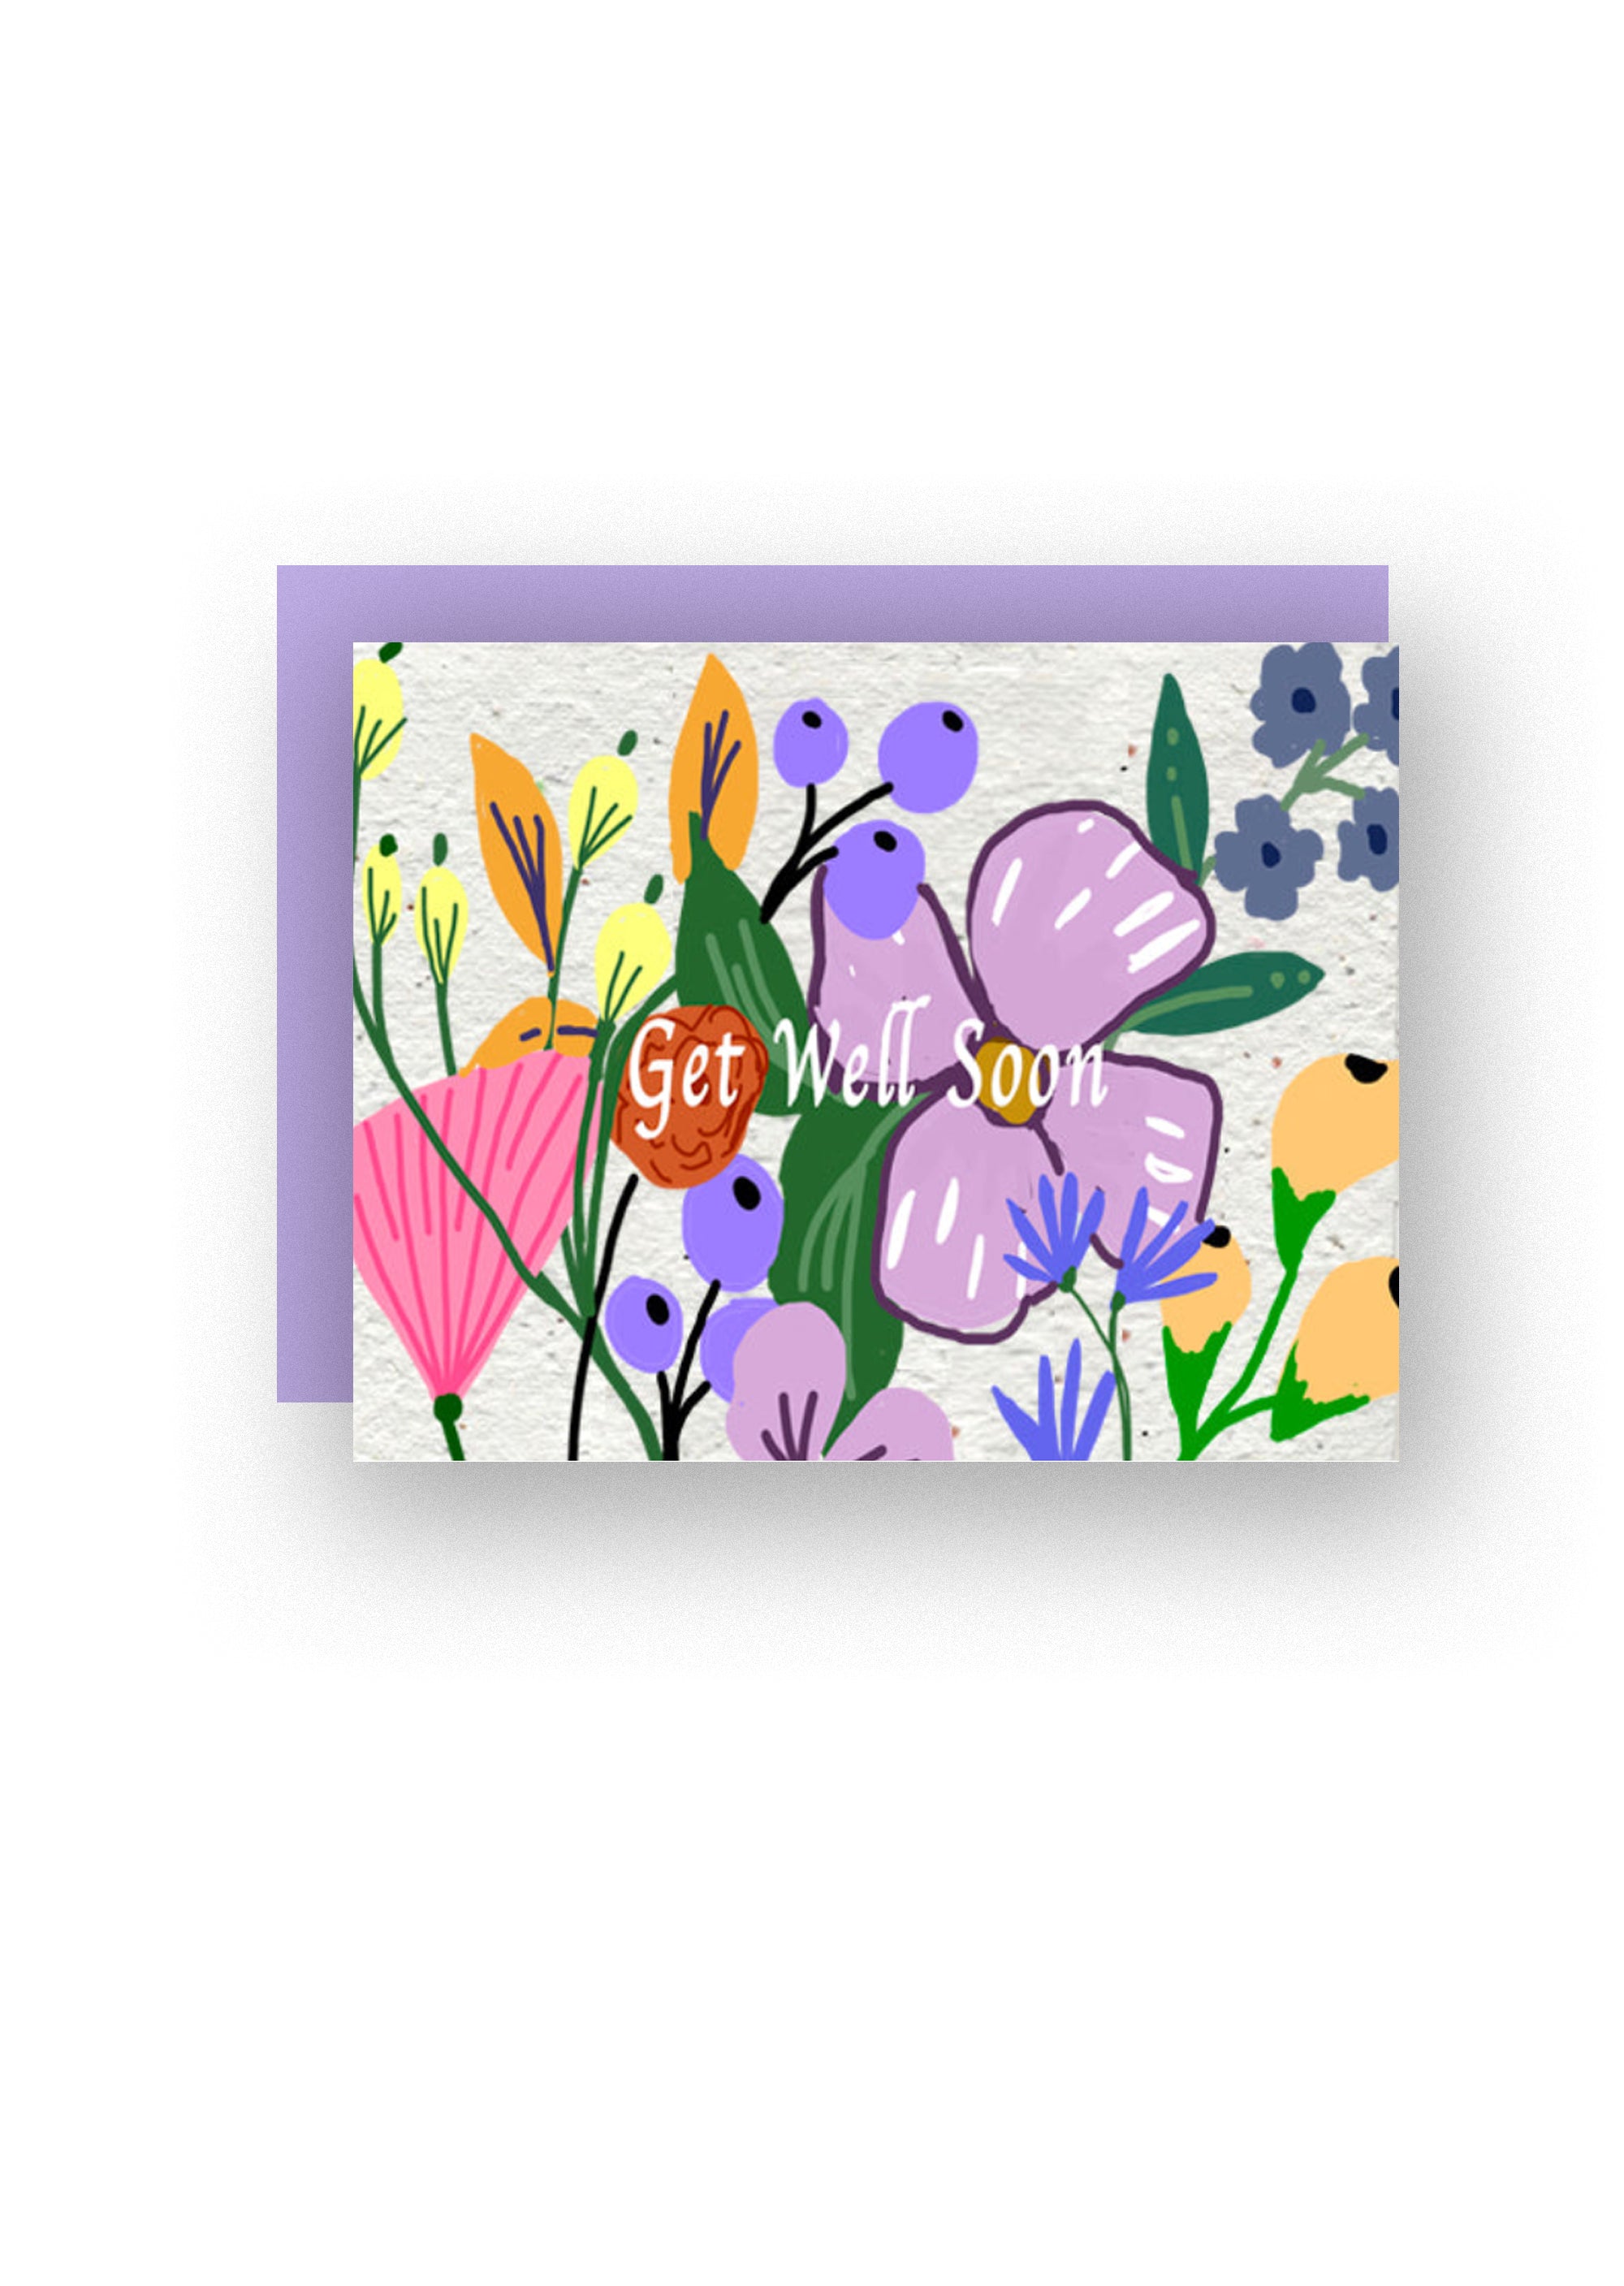 "Healing Wishes: Get Well Soon" Wildflower Seed Paper Card